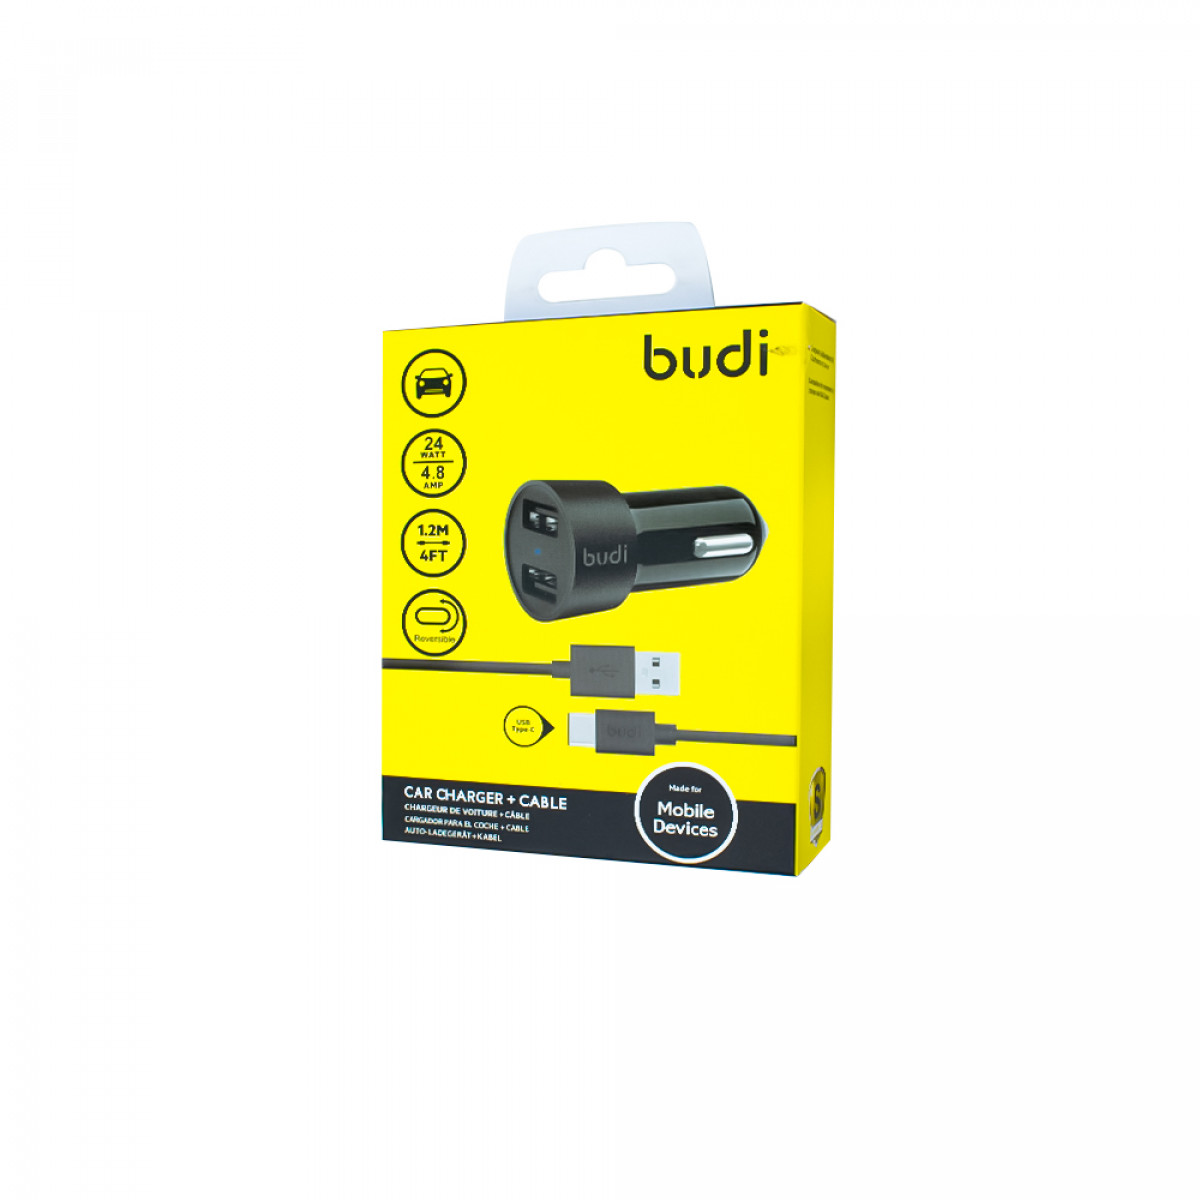 M8J622T - Car charger Budi 2 USB 4.8A with Type-C cable 1.2m